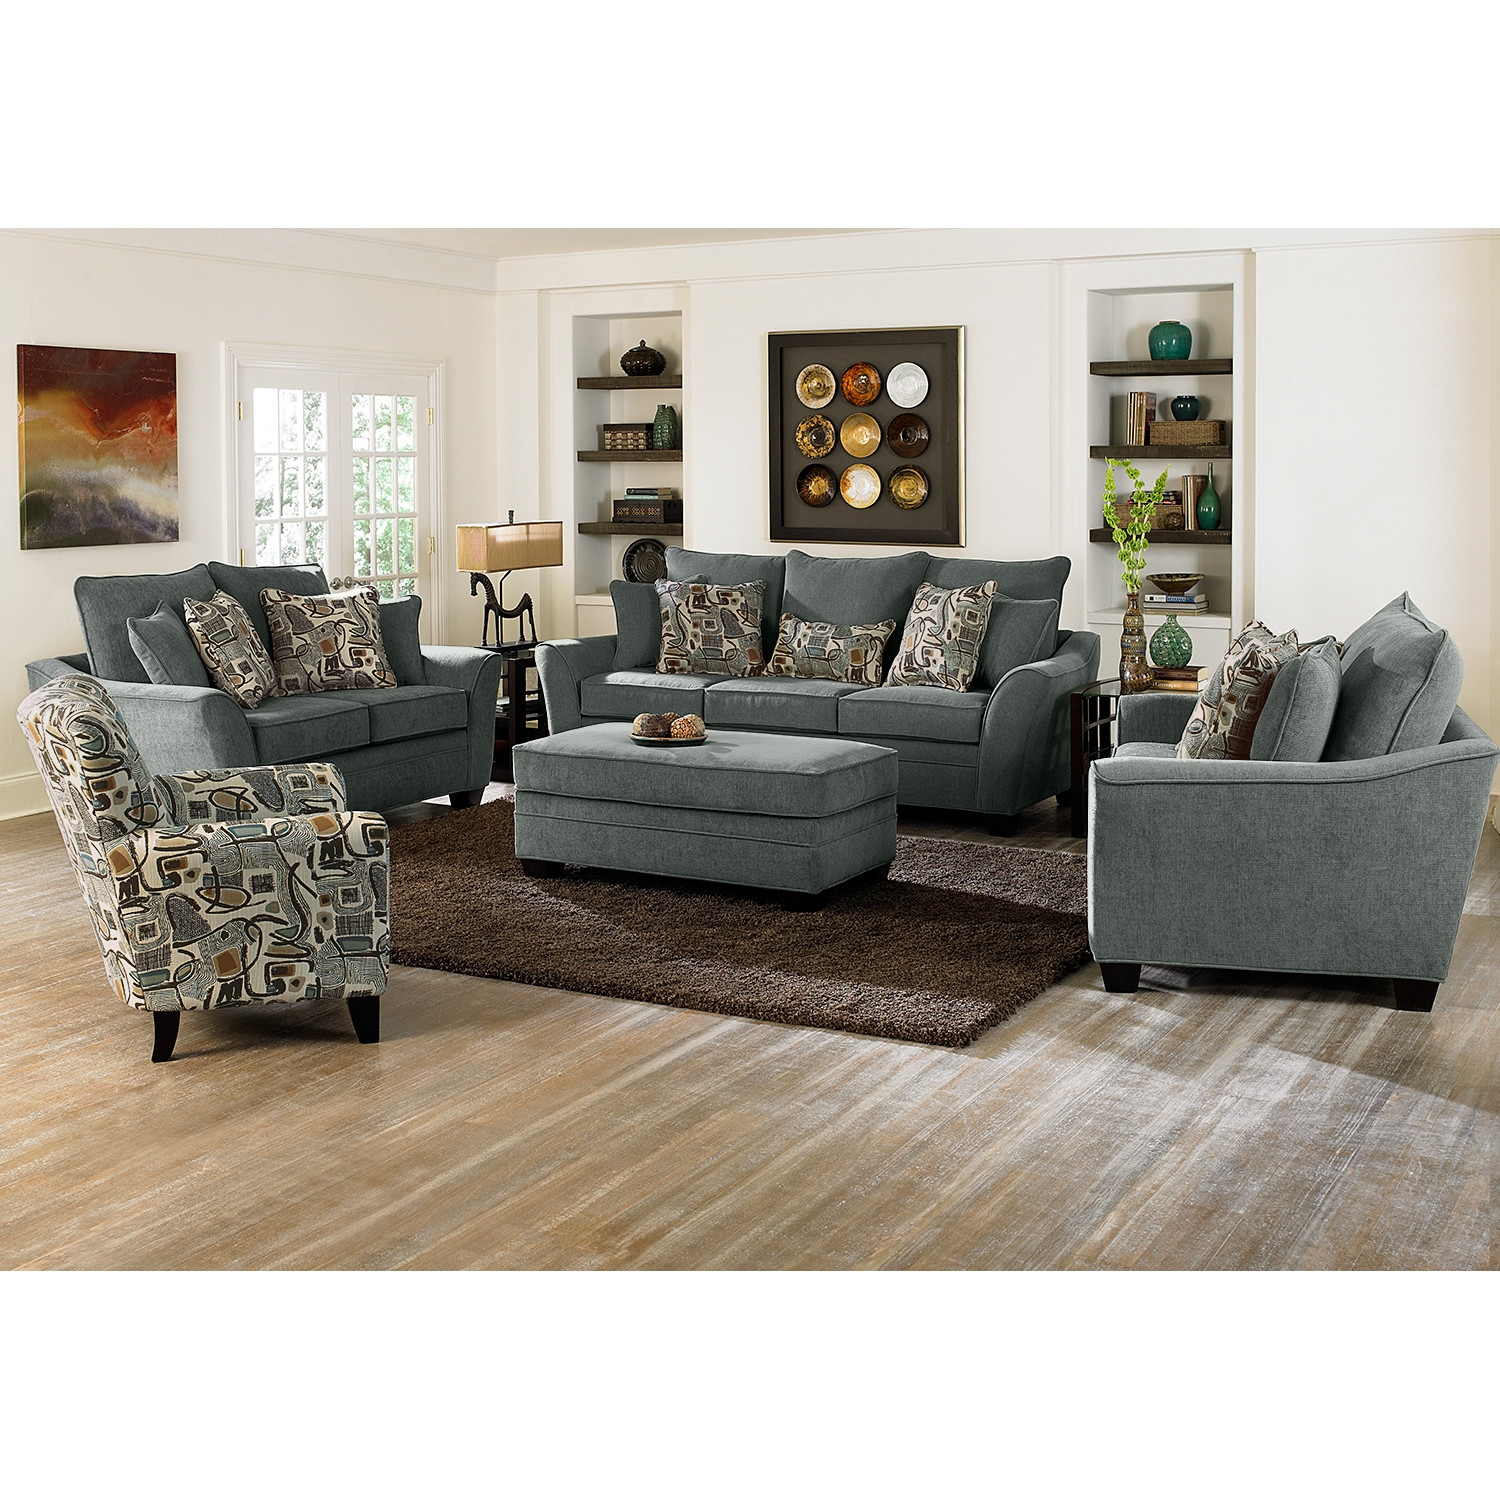 Living Room Chairs With Ottoman
 Perfect Chairs With Ottomans For Living Room – HomesFeed